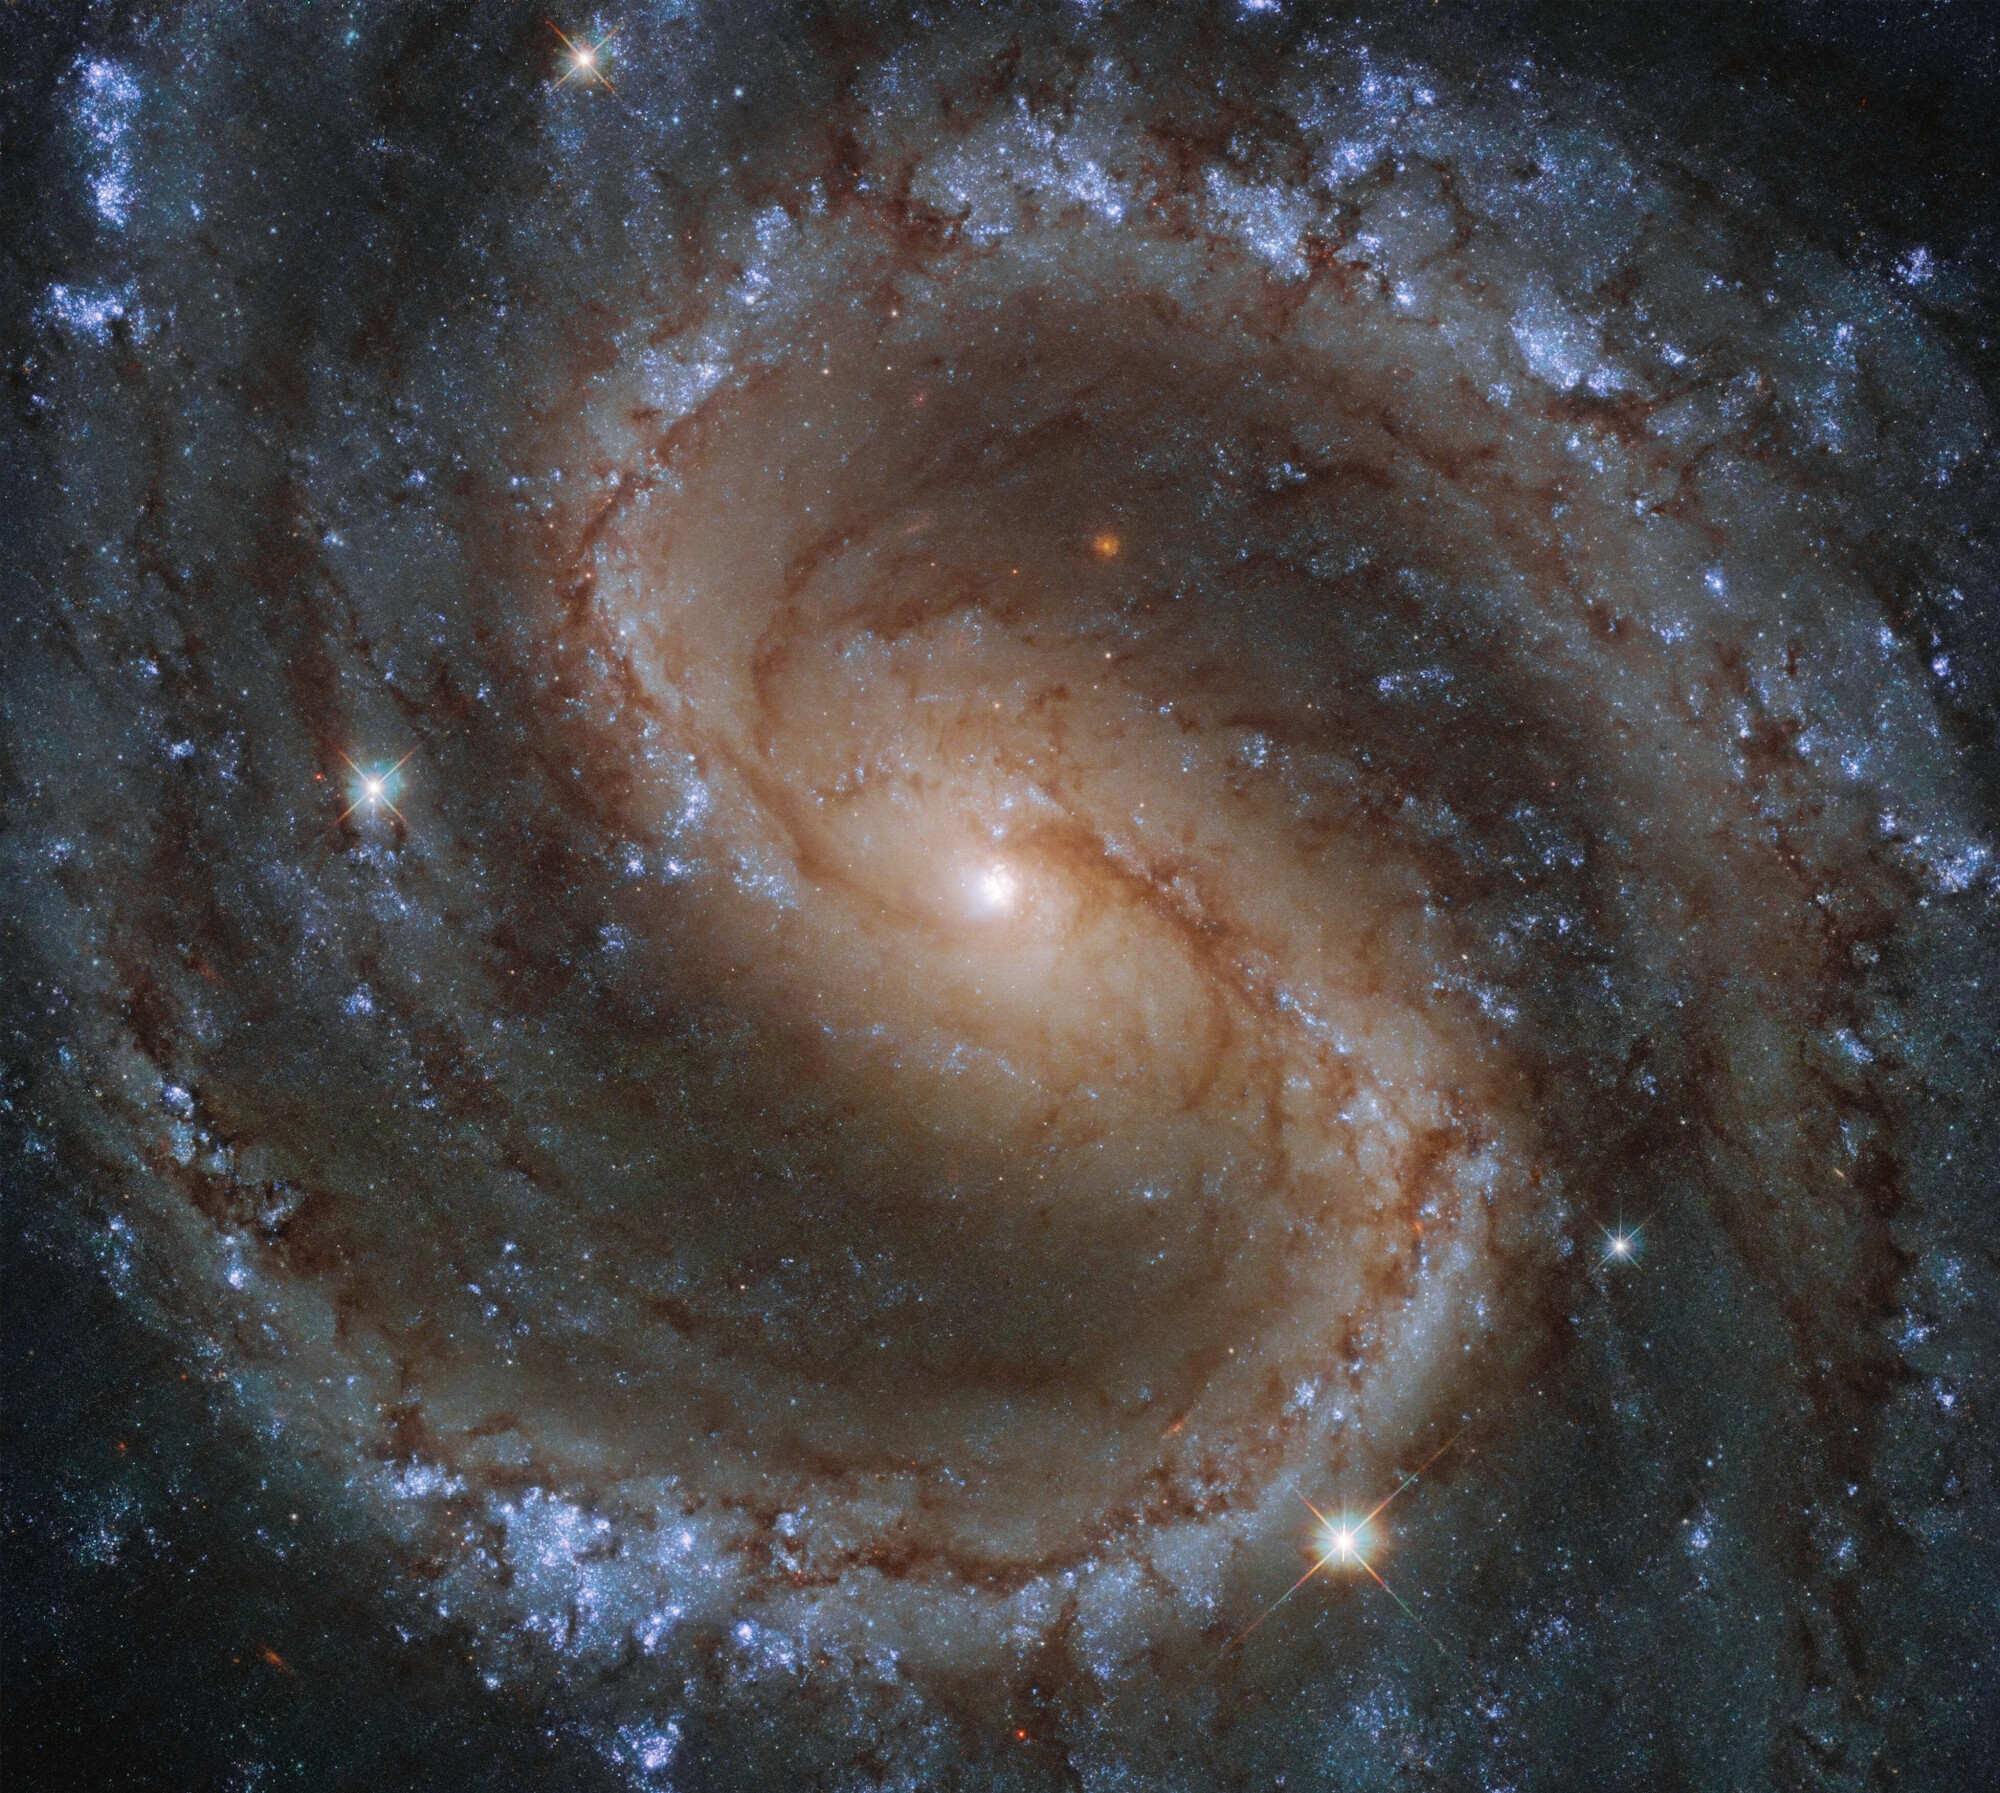 In this photo of the "Lost Galaxy," NGC 4535, the blue stretching out along the spirals signals younger stars while the yellow in the center denotes older stars.